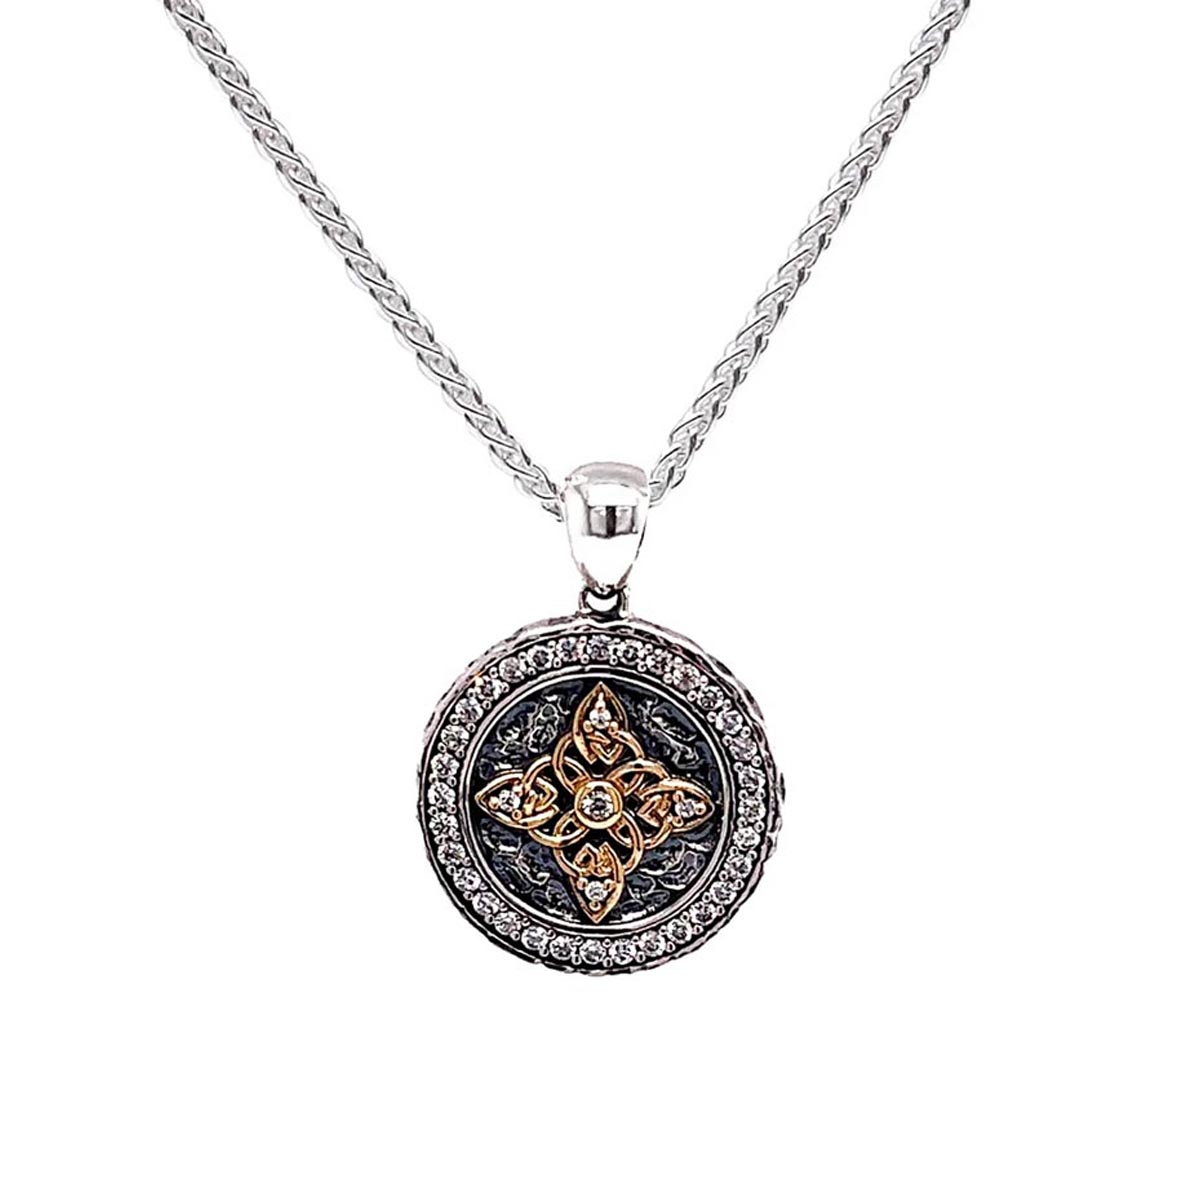 Keith Jack Celestial Cubic Zirconia Medallion Necklace in Sterling Silver and 10kt Yellow Gold